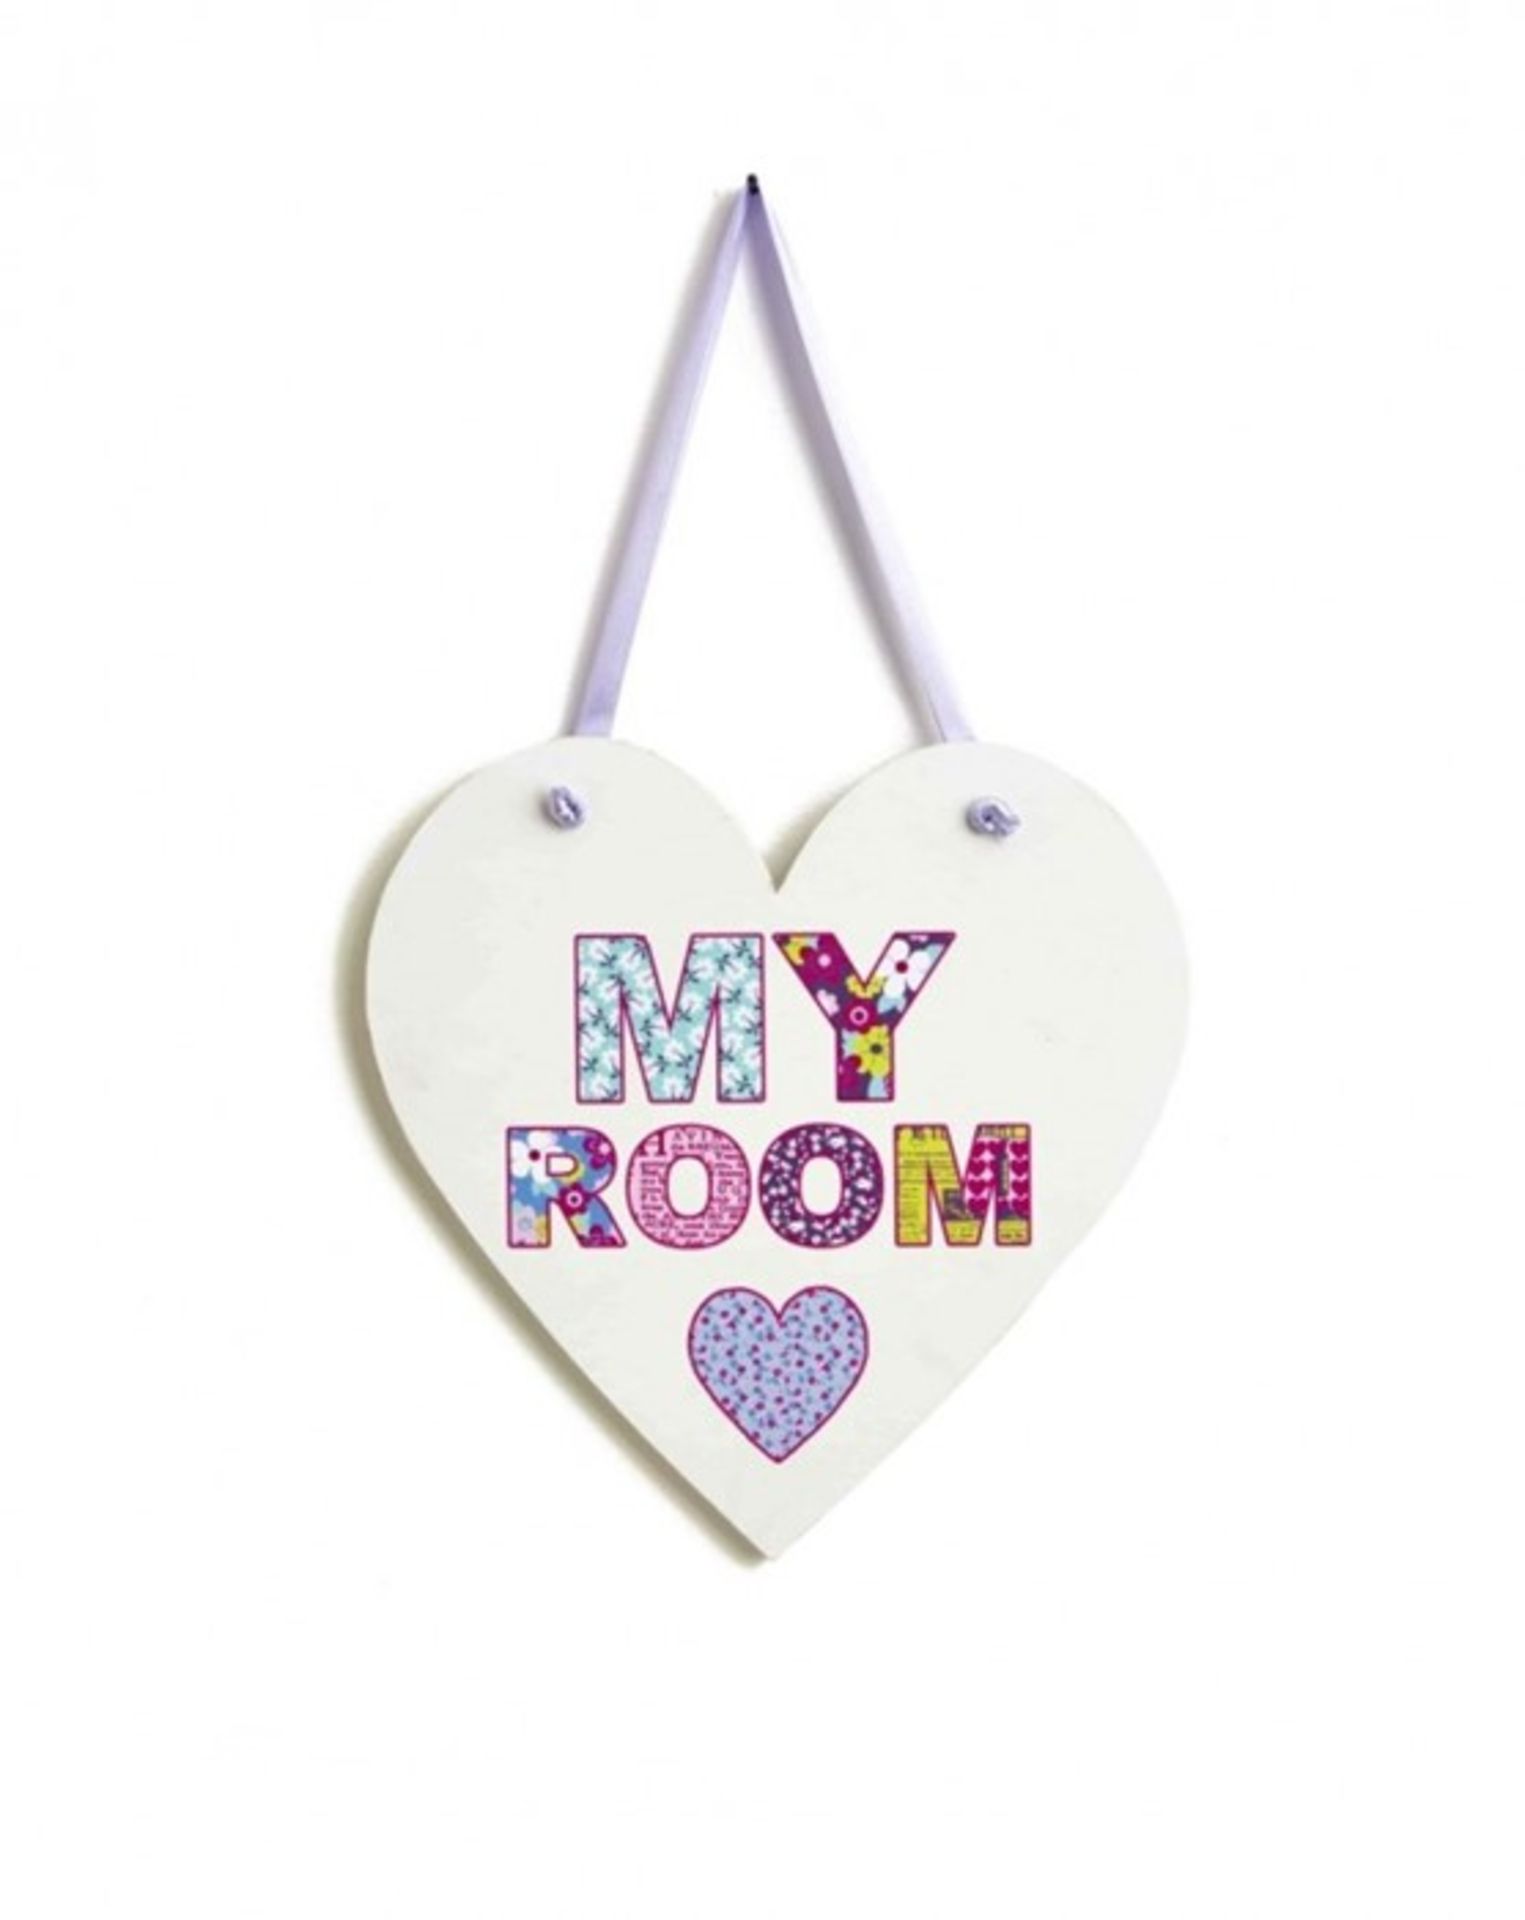 1 BRAND NEW BOXED ARTHOUSE MY ROOM WOODEN PATCHWORK HEART SIGN, 20CM X 20CM / RRP £11.95 (VIEWING